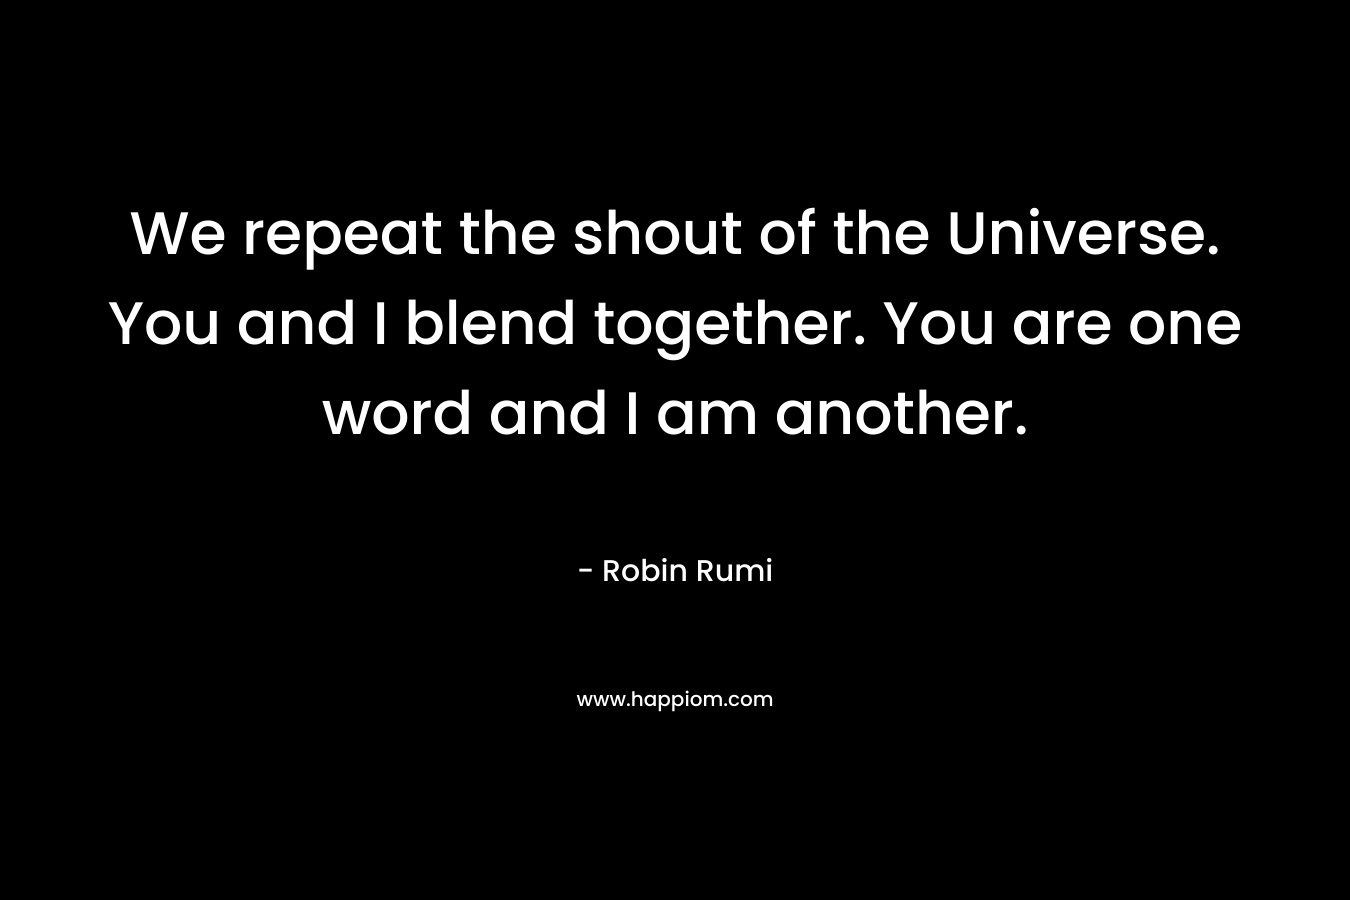 We repeat the shout of the Universe. You and I blend together. You are one word and I am another. – Robin Rumi